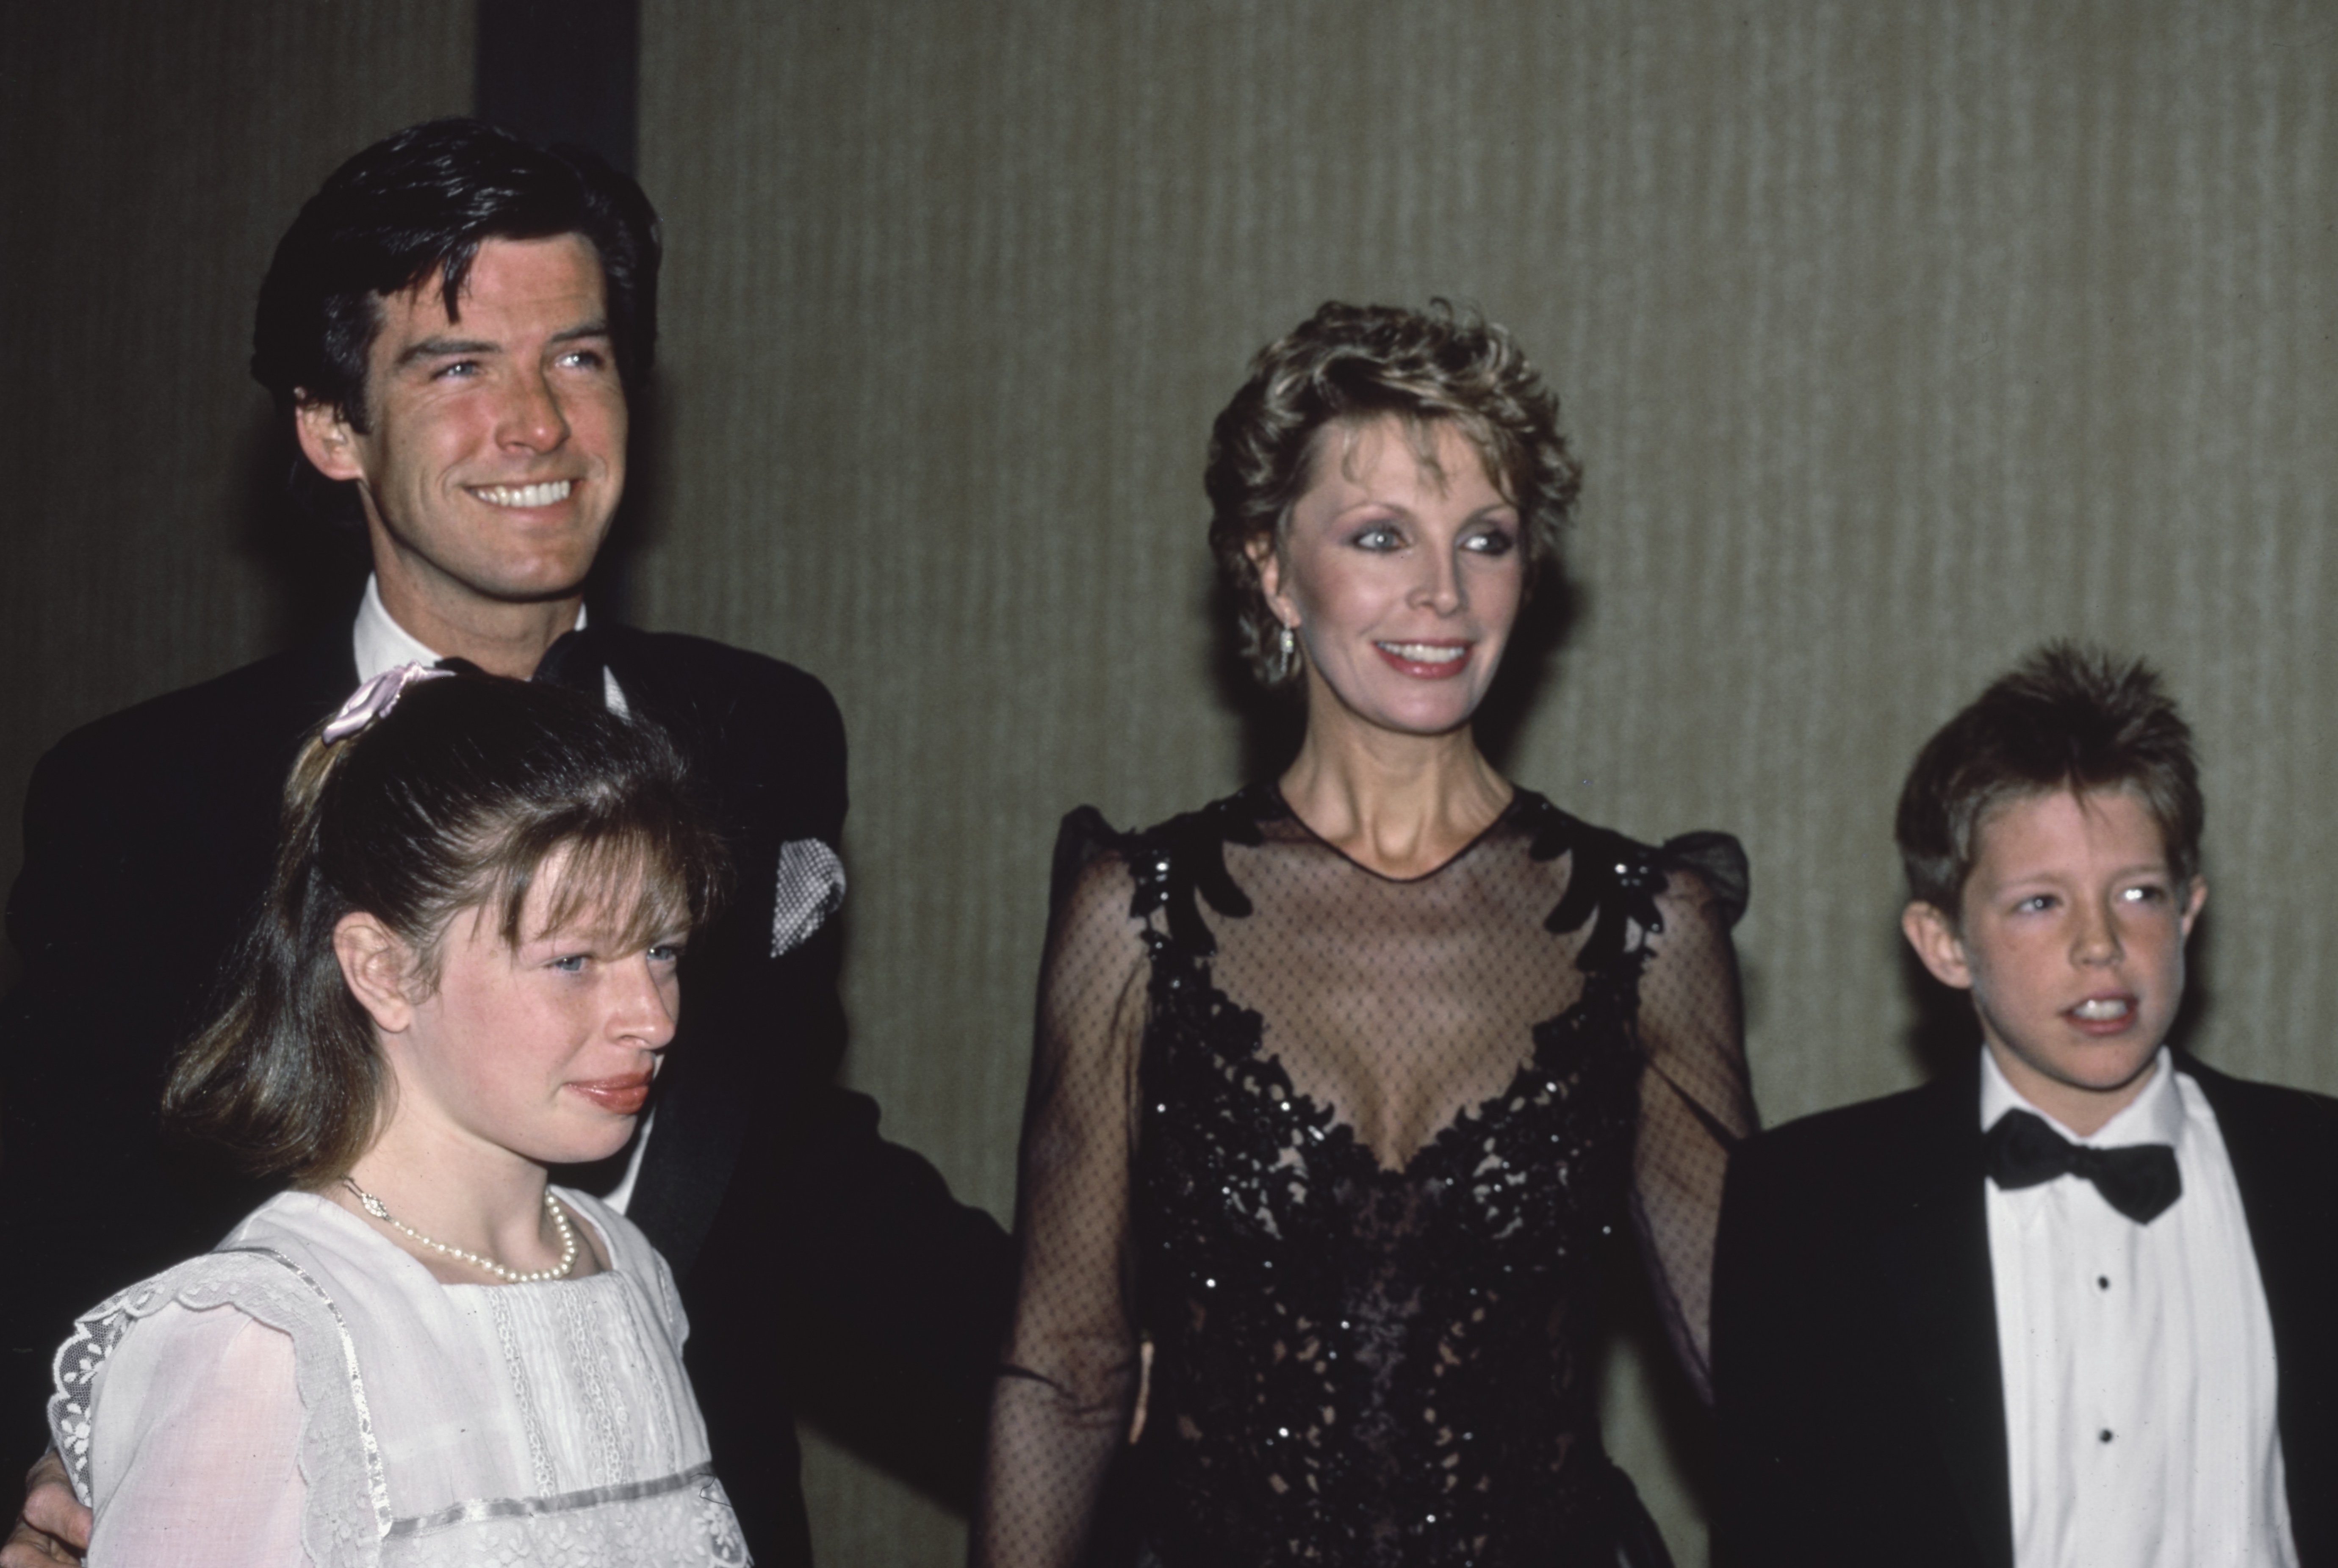 Pierce Brosnan, Cassandra Harris, and her children whom he later adopted, Charlotte Harris and Christopher Harris, at the opening night performance of "Cats" on January 11, 1985 | Source: Getty Images